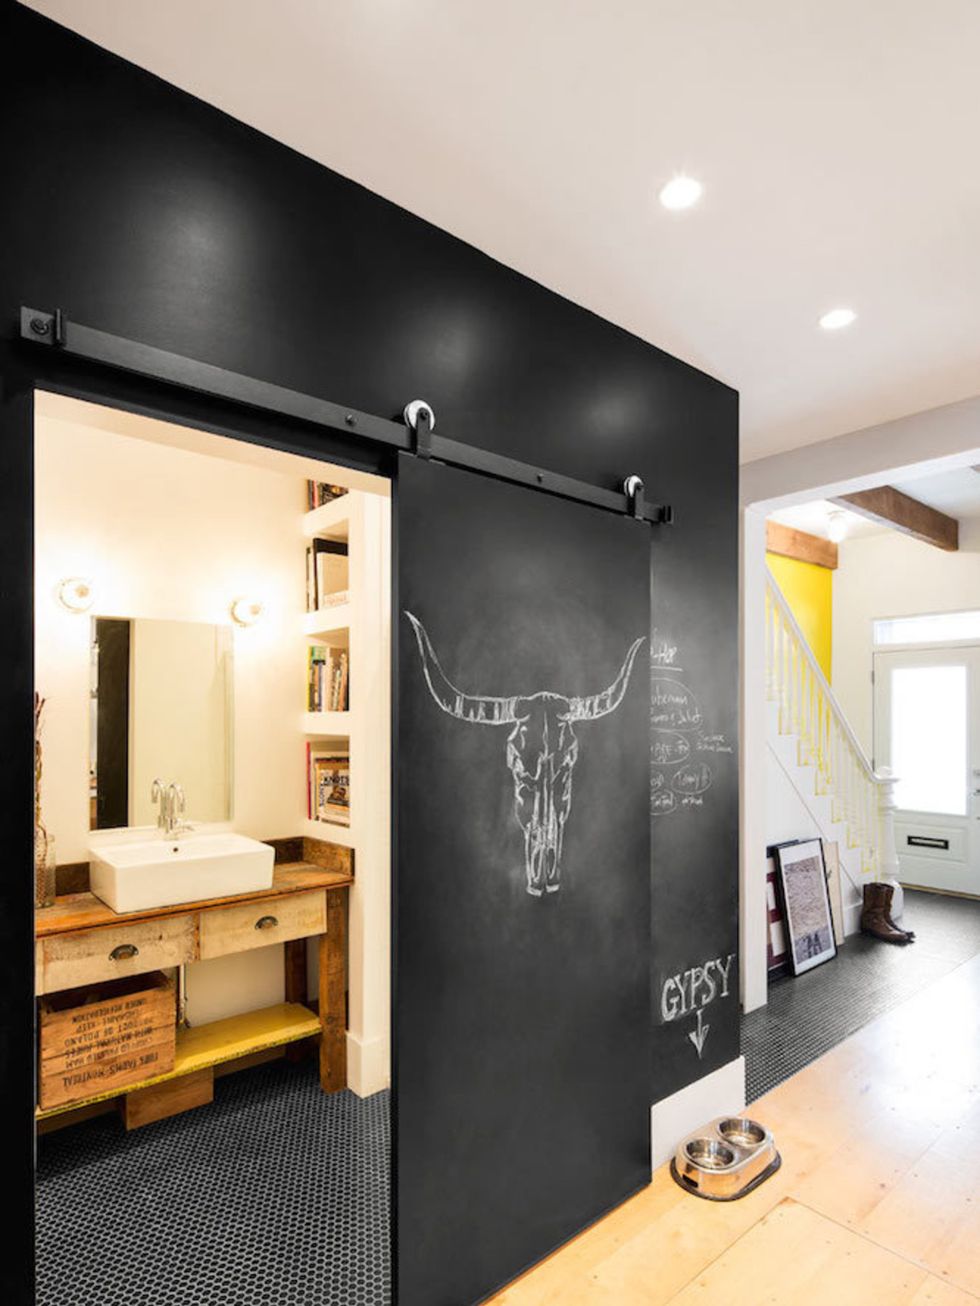 <p>For a cooler, younger design, how about a chalkboard wall? -<a href="http://design-milk.com/historical-row-house-gets-whimsical-industrial-renovation/grand-truck-revival-row-house-markvivi-8/" target="_blank">Design-Milk</a></p>